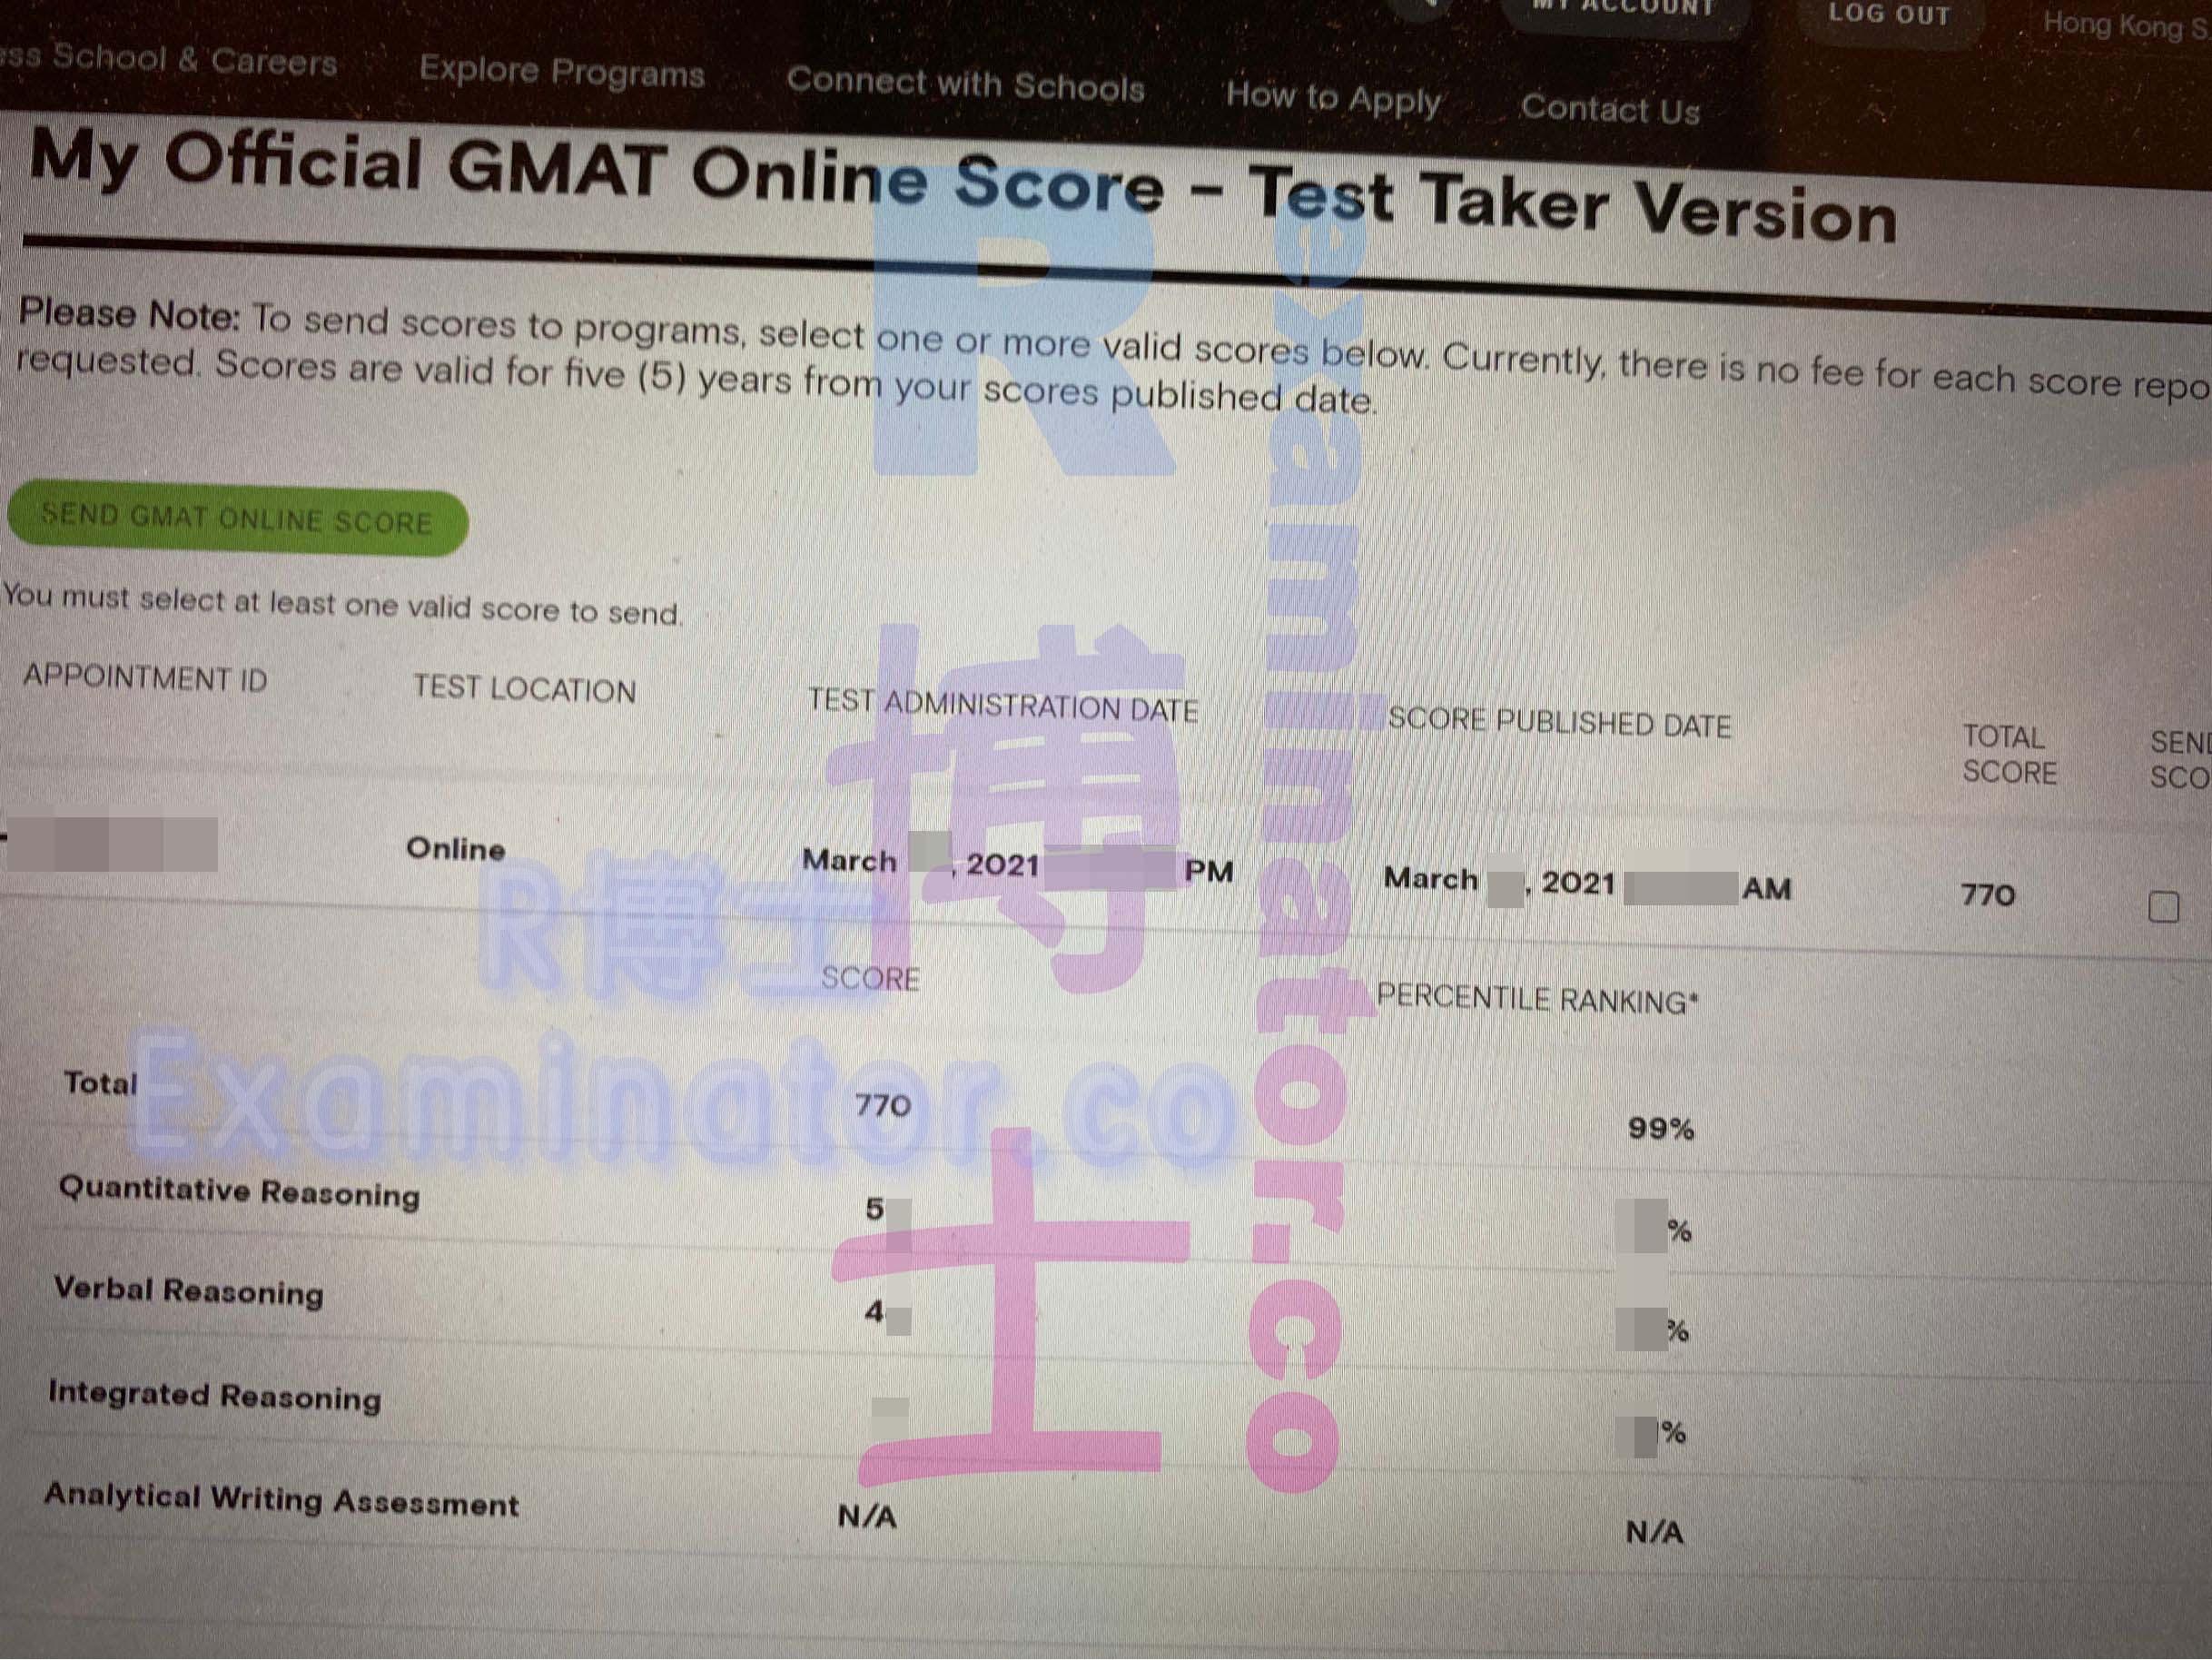 770 on the GMAT Online🎉 Our test taker is a rare human being who eats GMAT for breakfast, lunch and dinner!